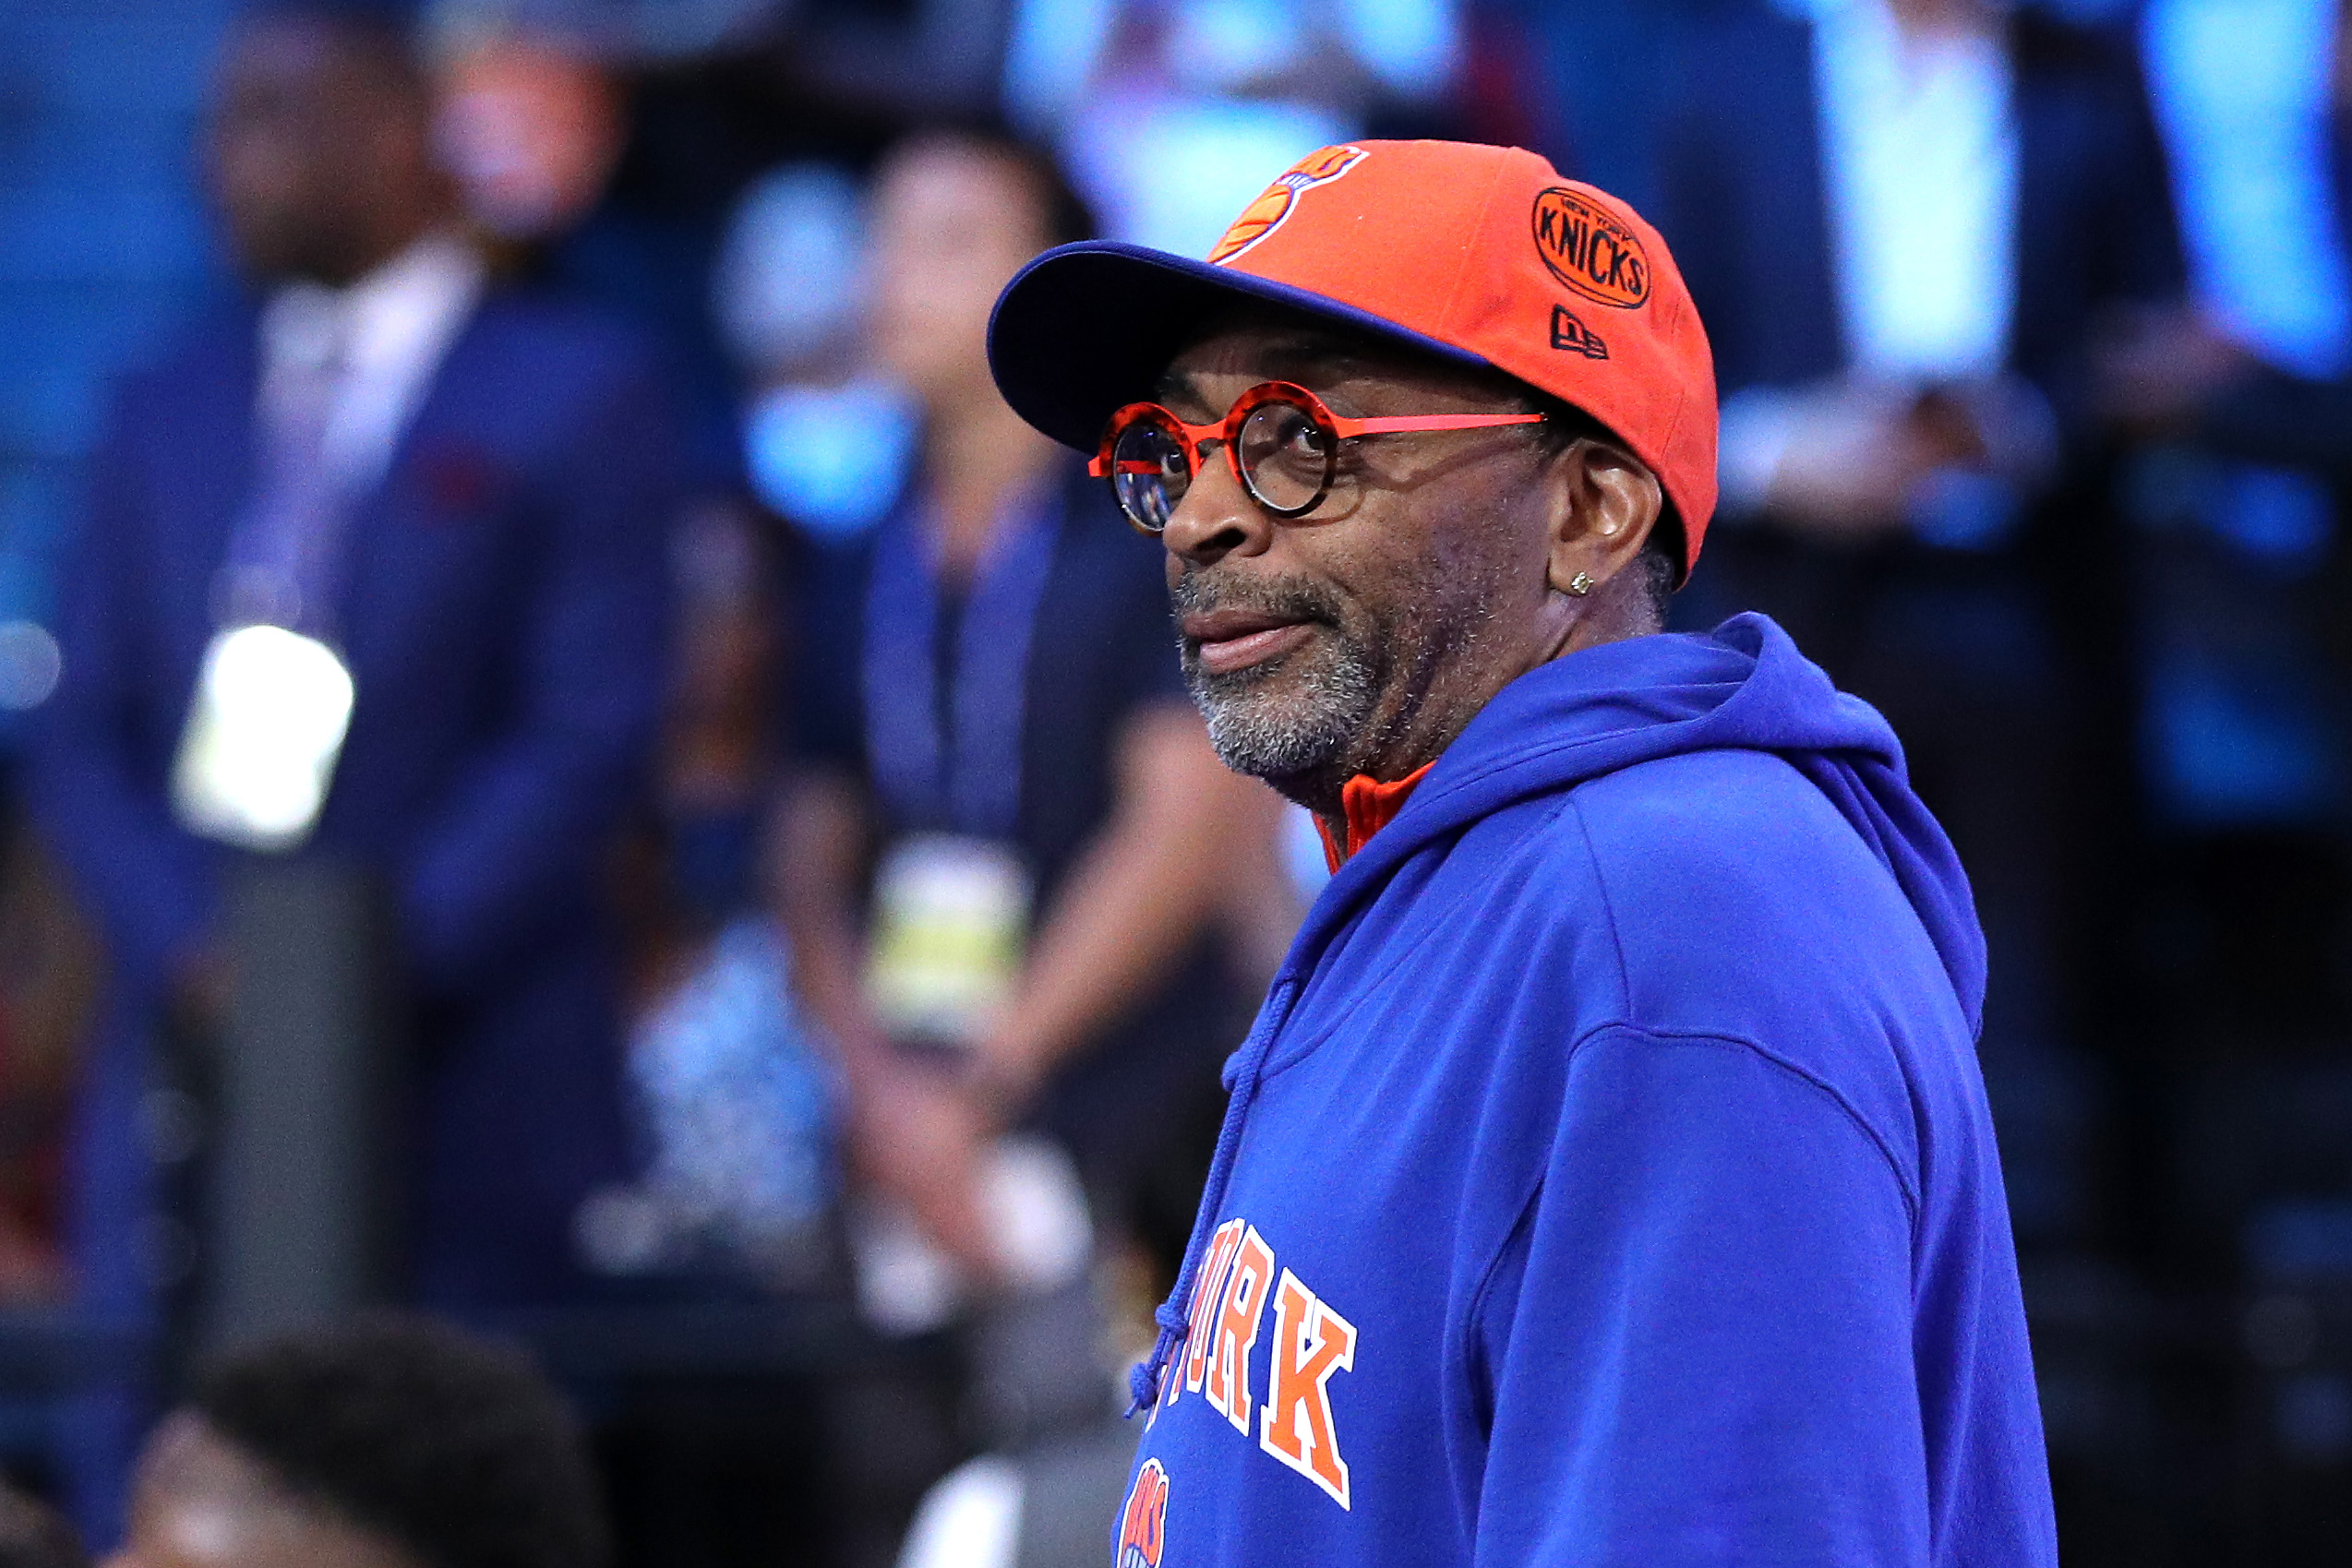 PHOTO: Director and New York Knicks fan Spike Lee looks on before the start of the 2019 NBA Draft at the Barclays Center, June 20, 2019, in New York City.